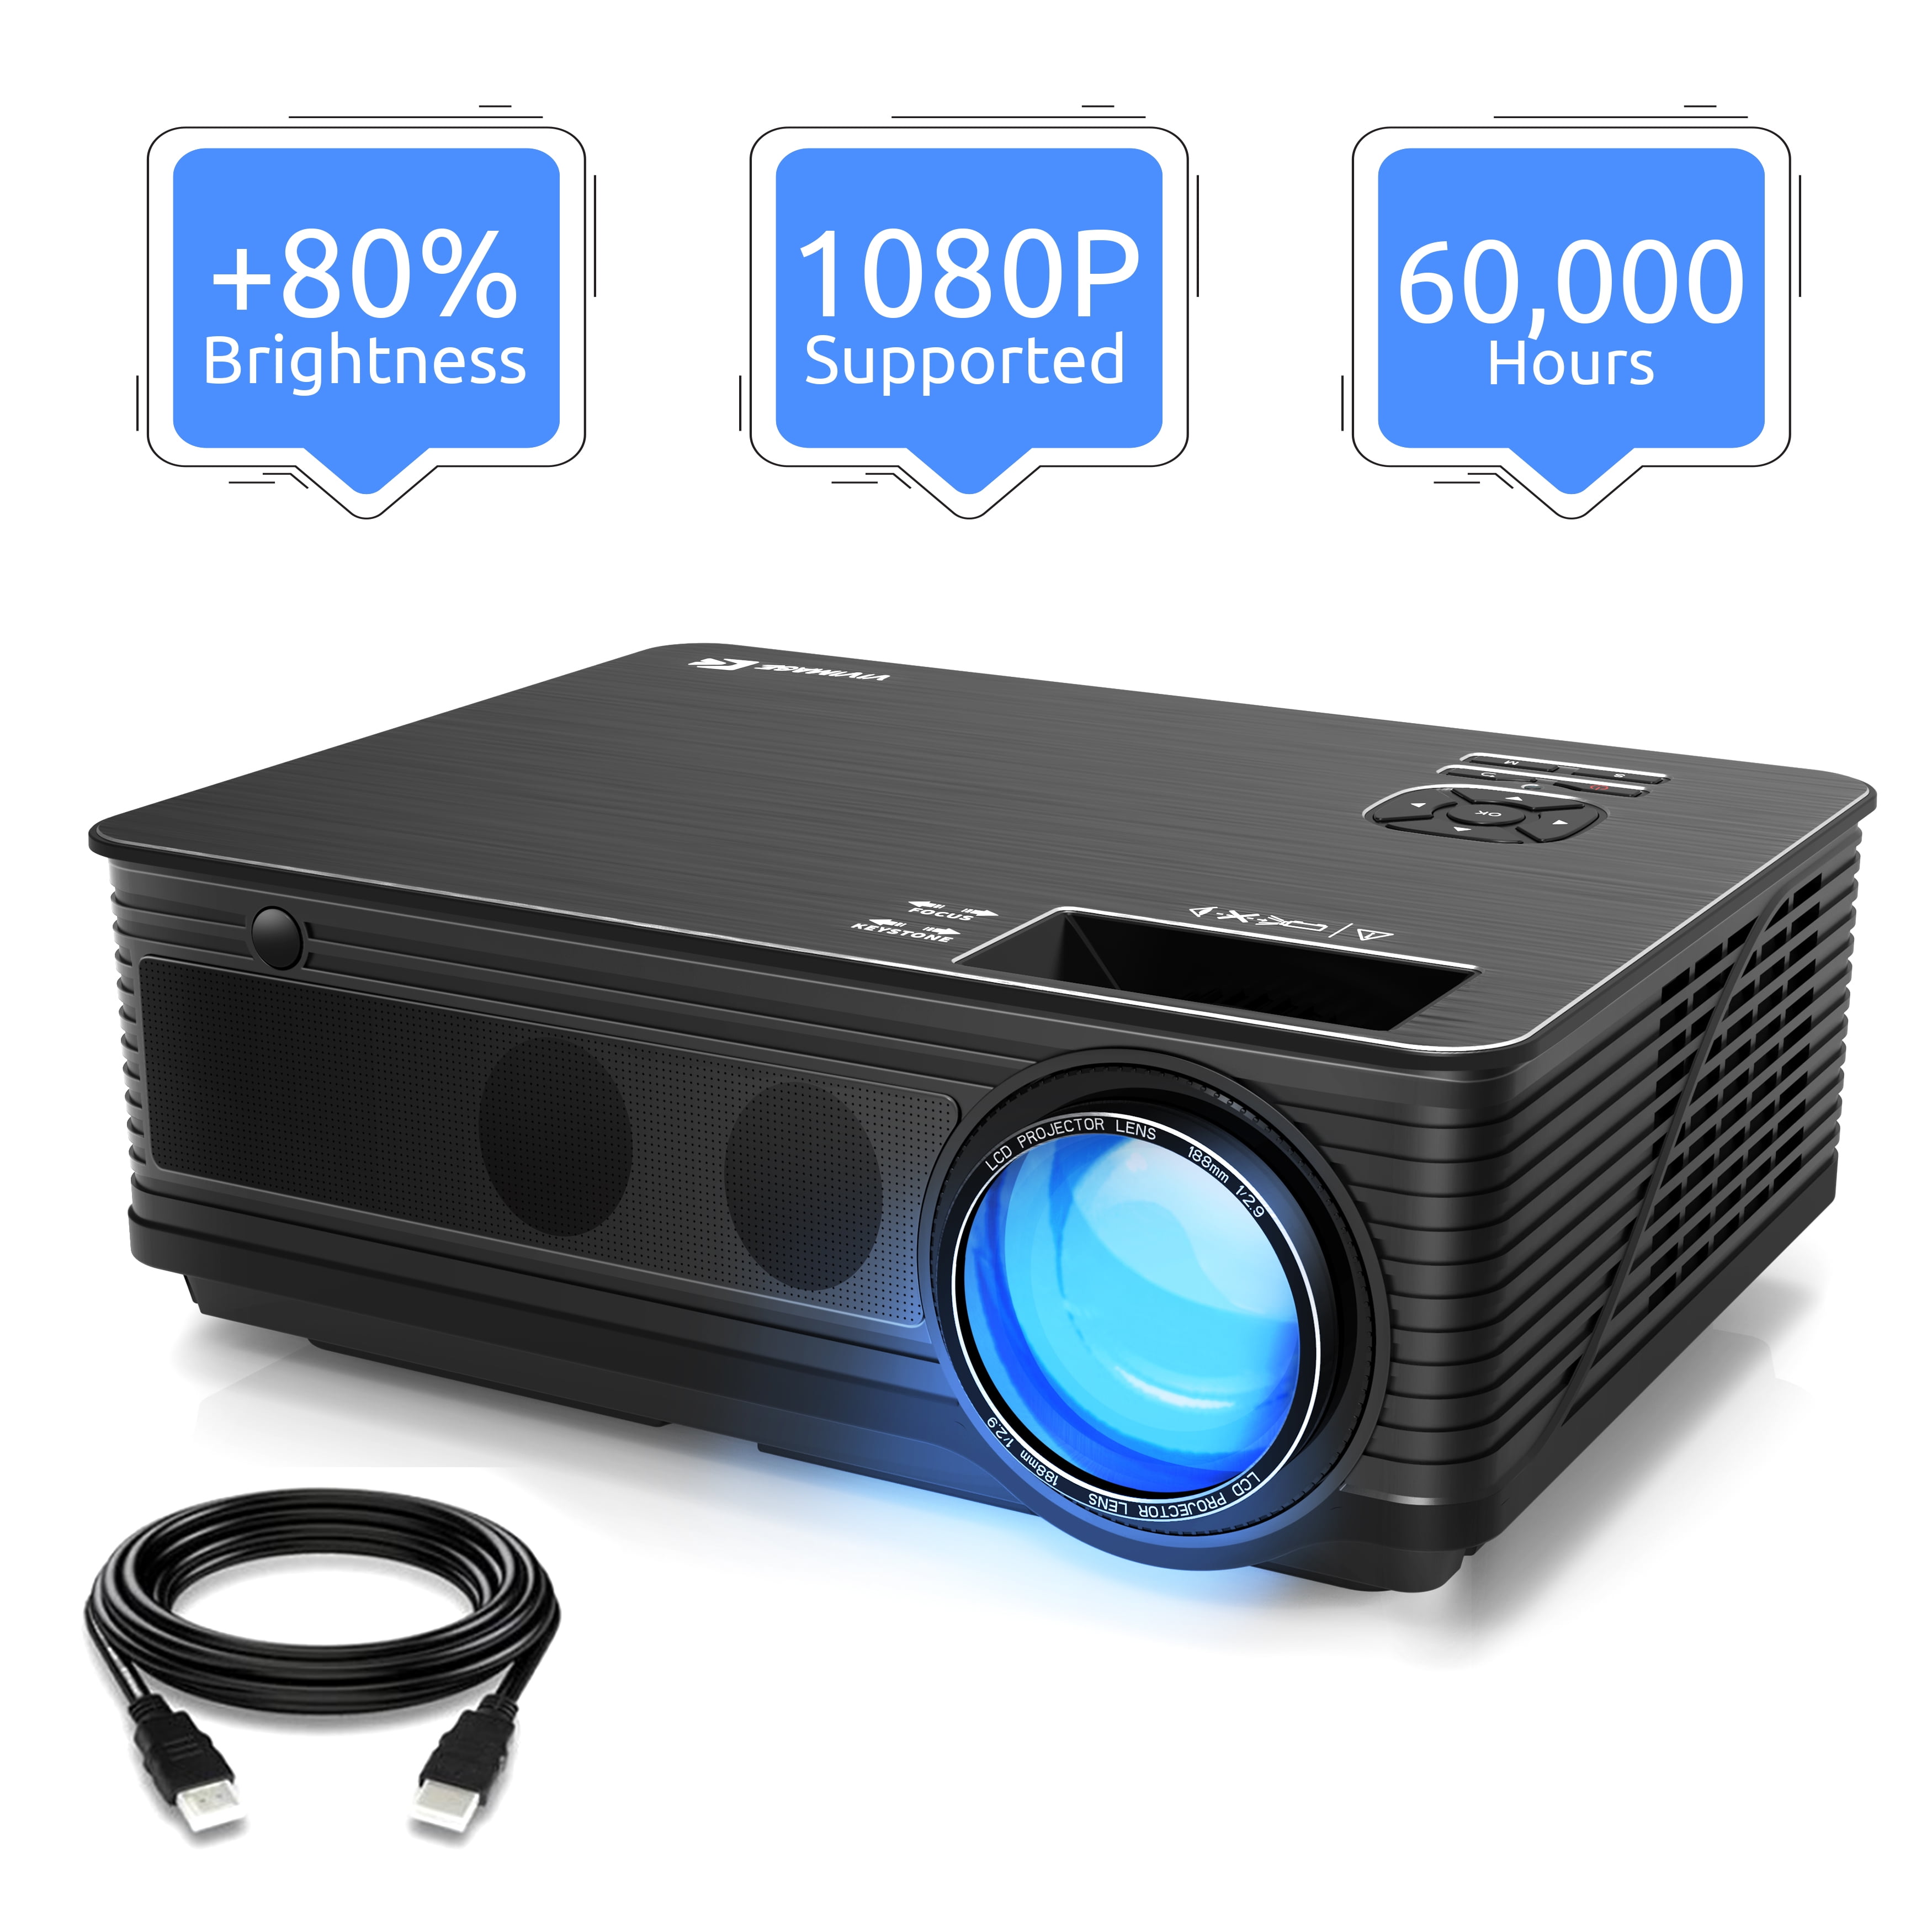 VIVIMAGE Cinemoon C580 Projector 1080P Supported, High Brightness Video  Projector with 200 Projection Size Includes HDMI Cable